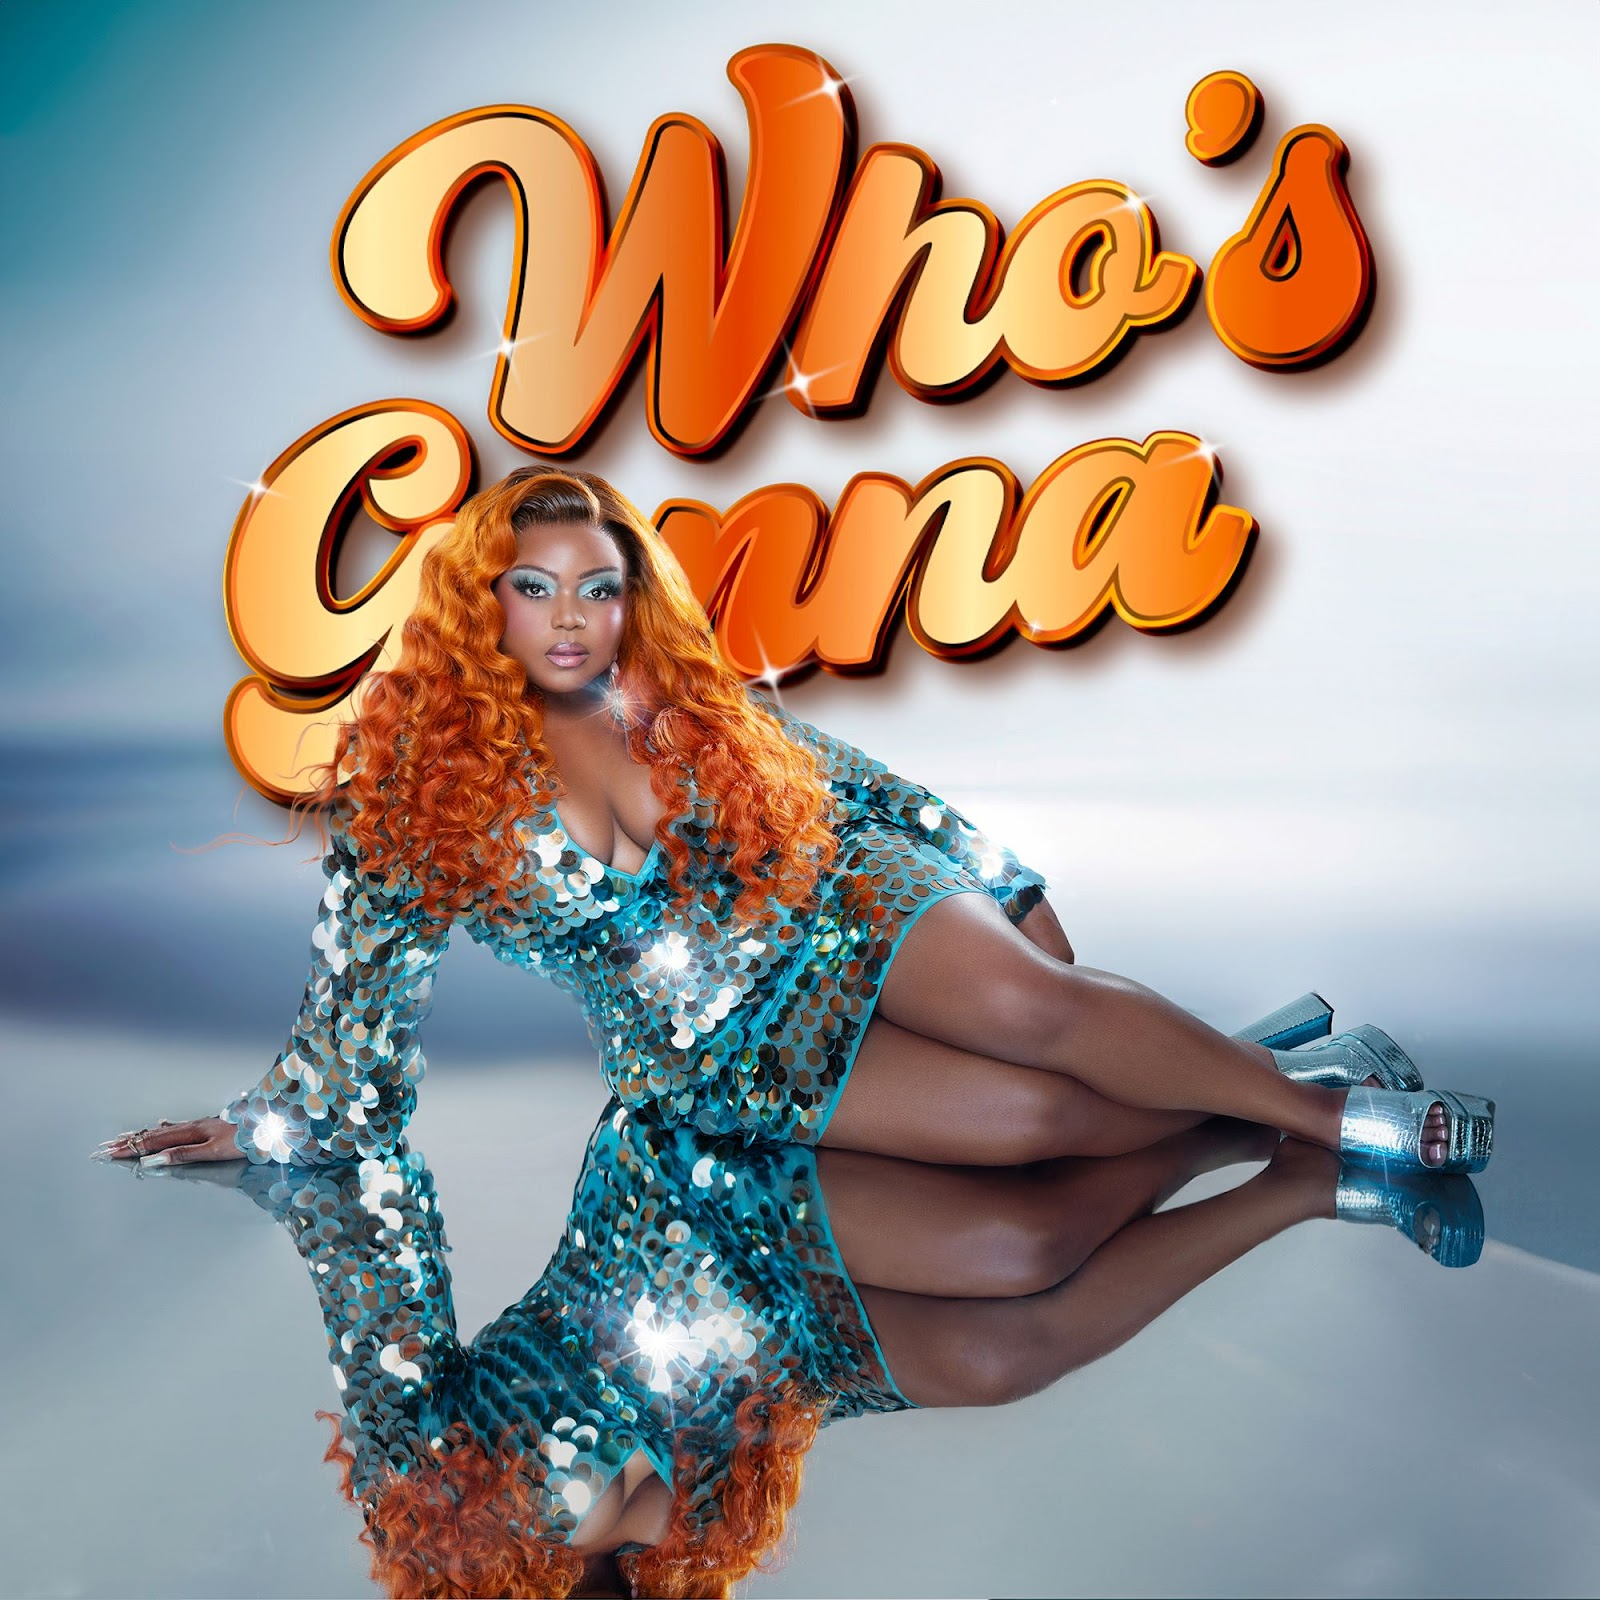 Pop Sensation LU KALA Releases New Single “Who’s Gonna” Today, May 10